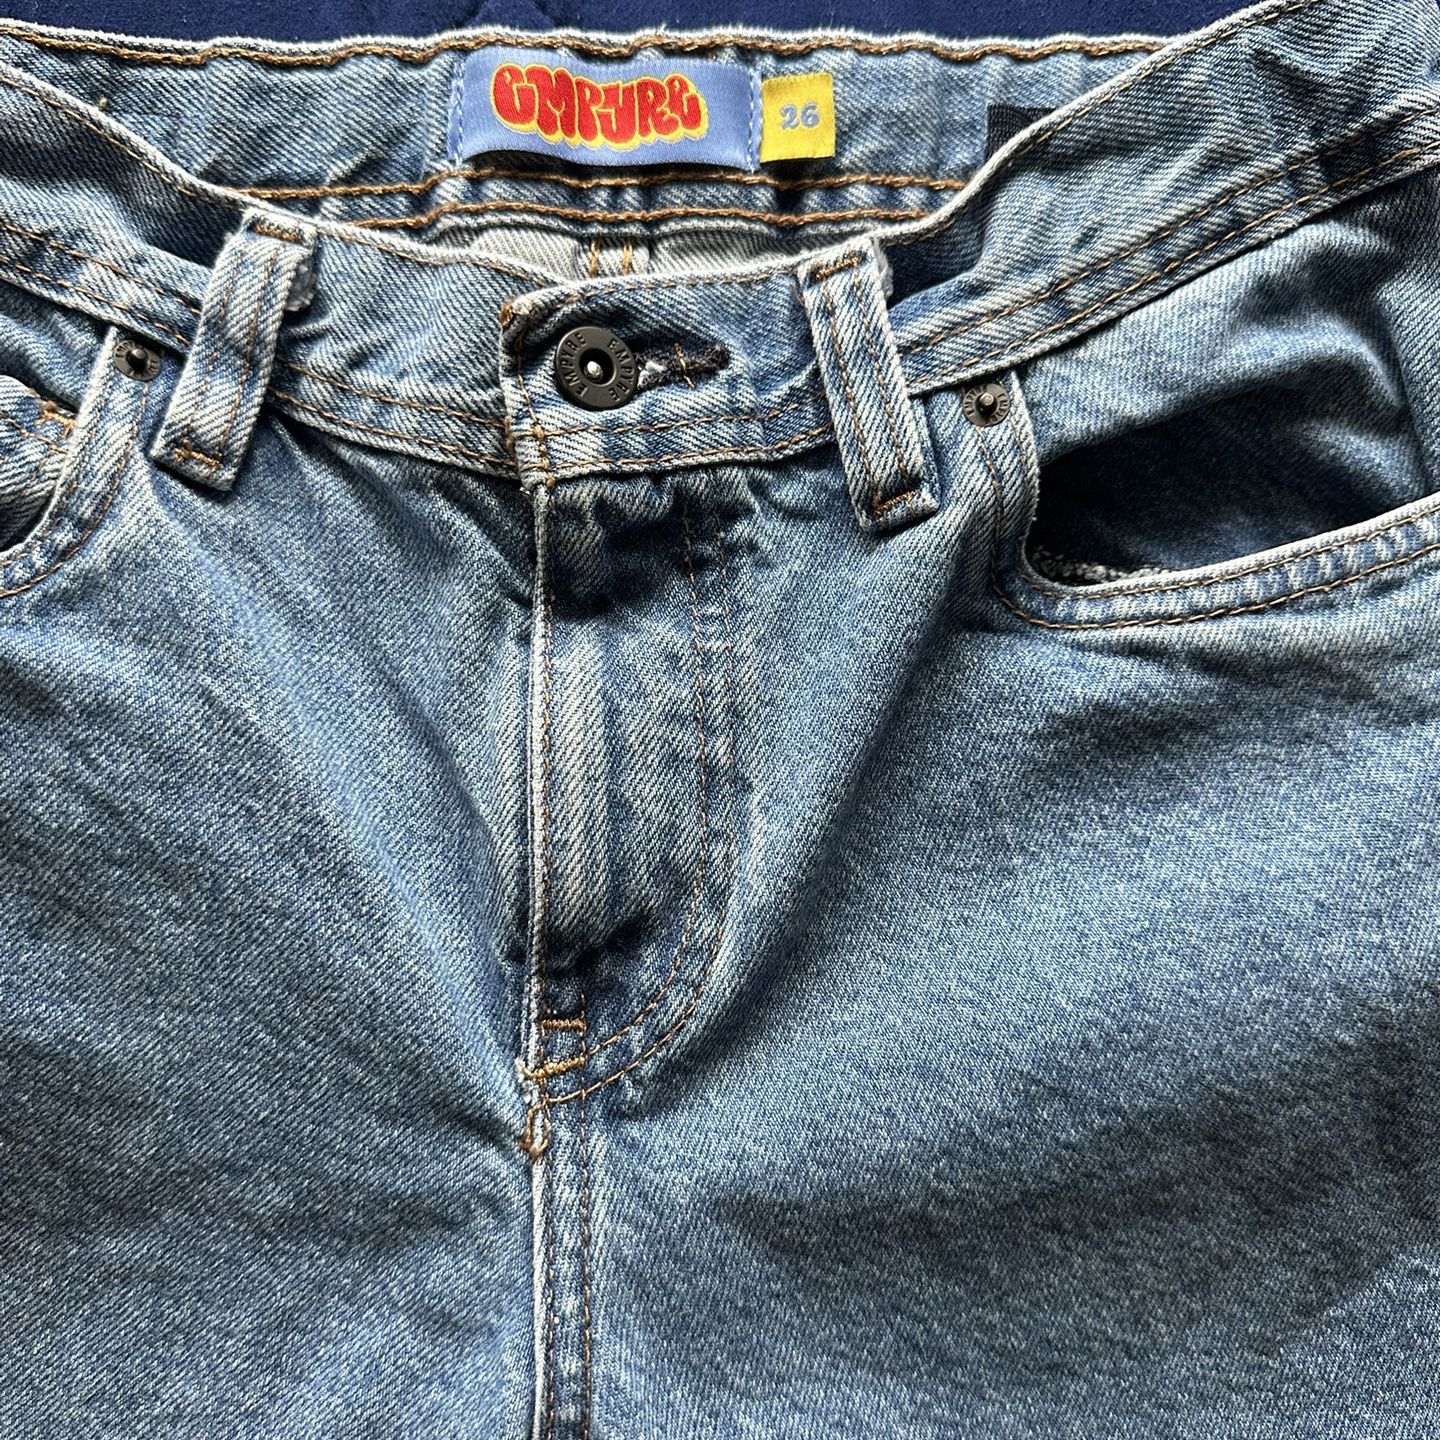 empyre jorts for Sale in Las Vegas, NV - OfferUp